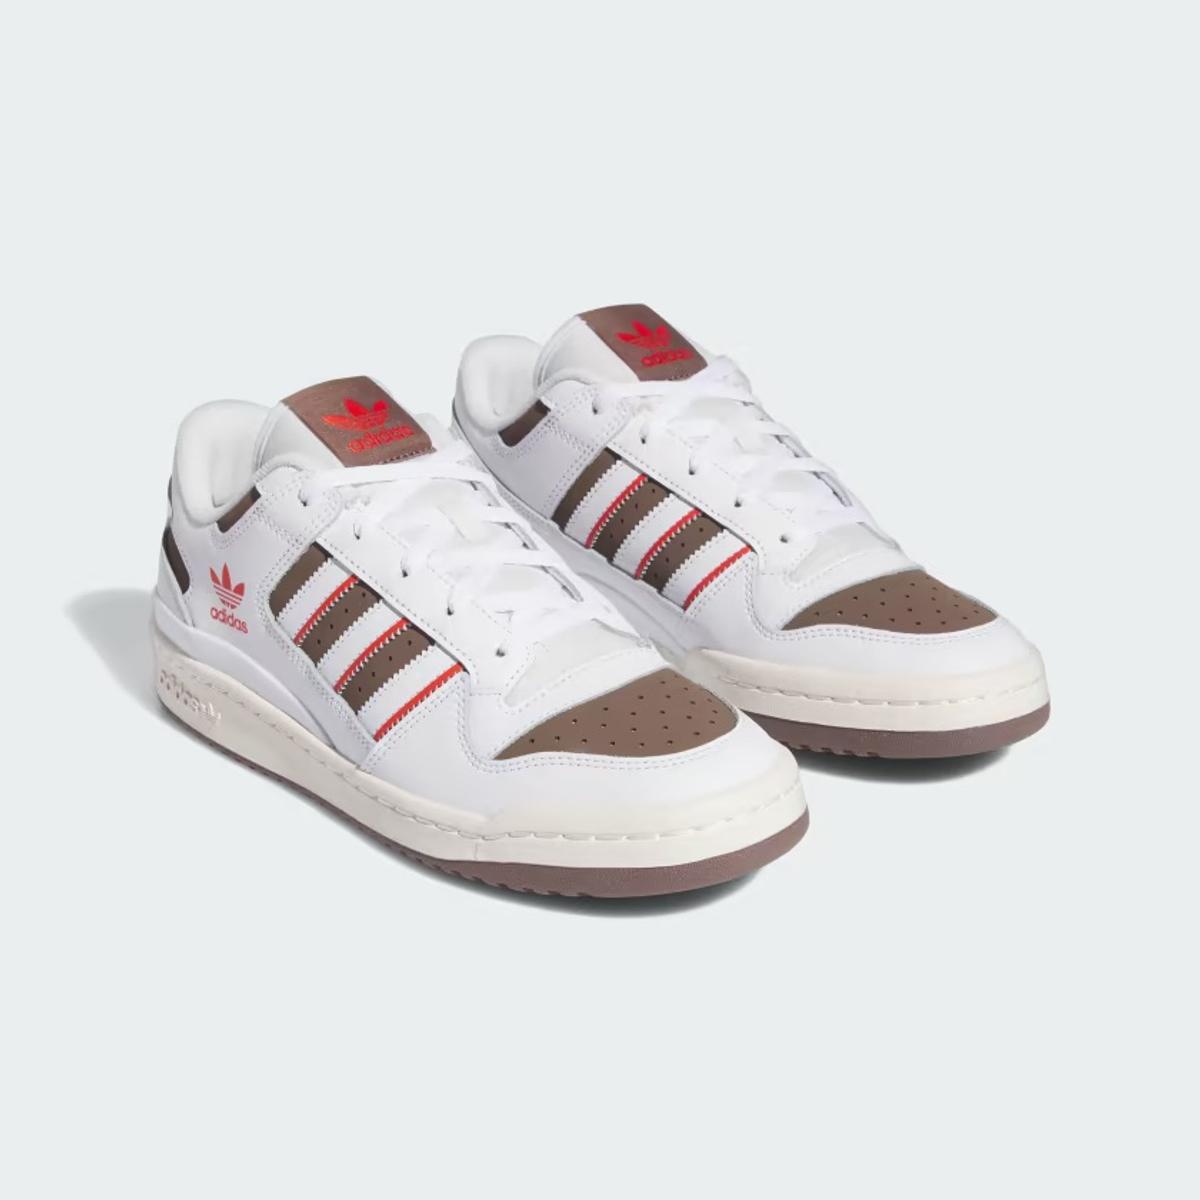 ADIDAS FORUM LOW CL BASKETBALL SHOES